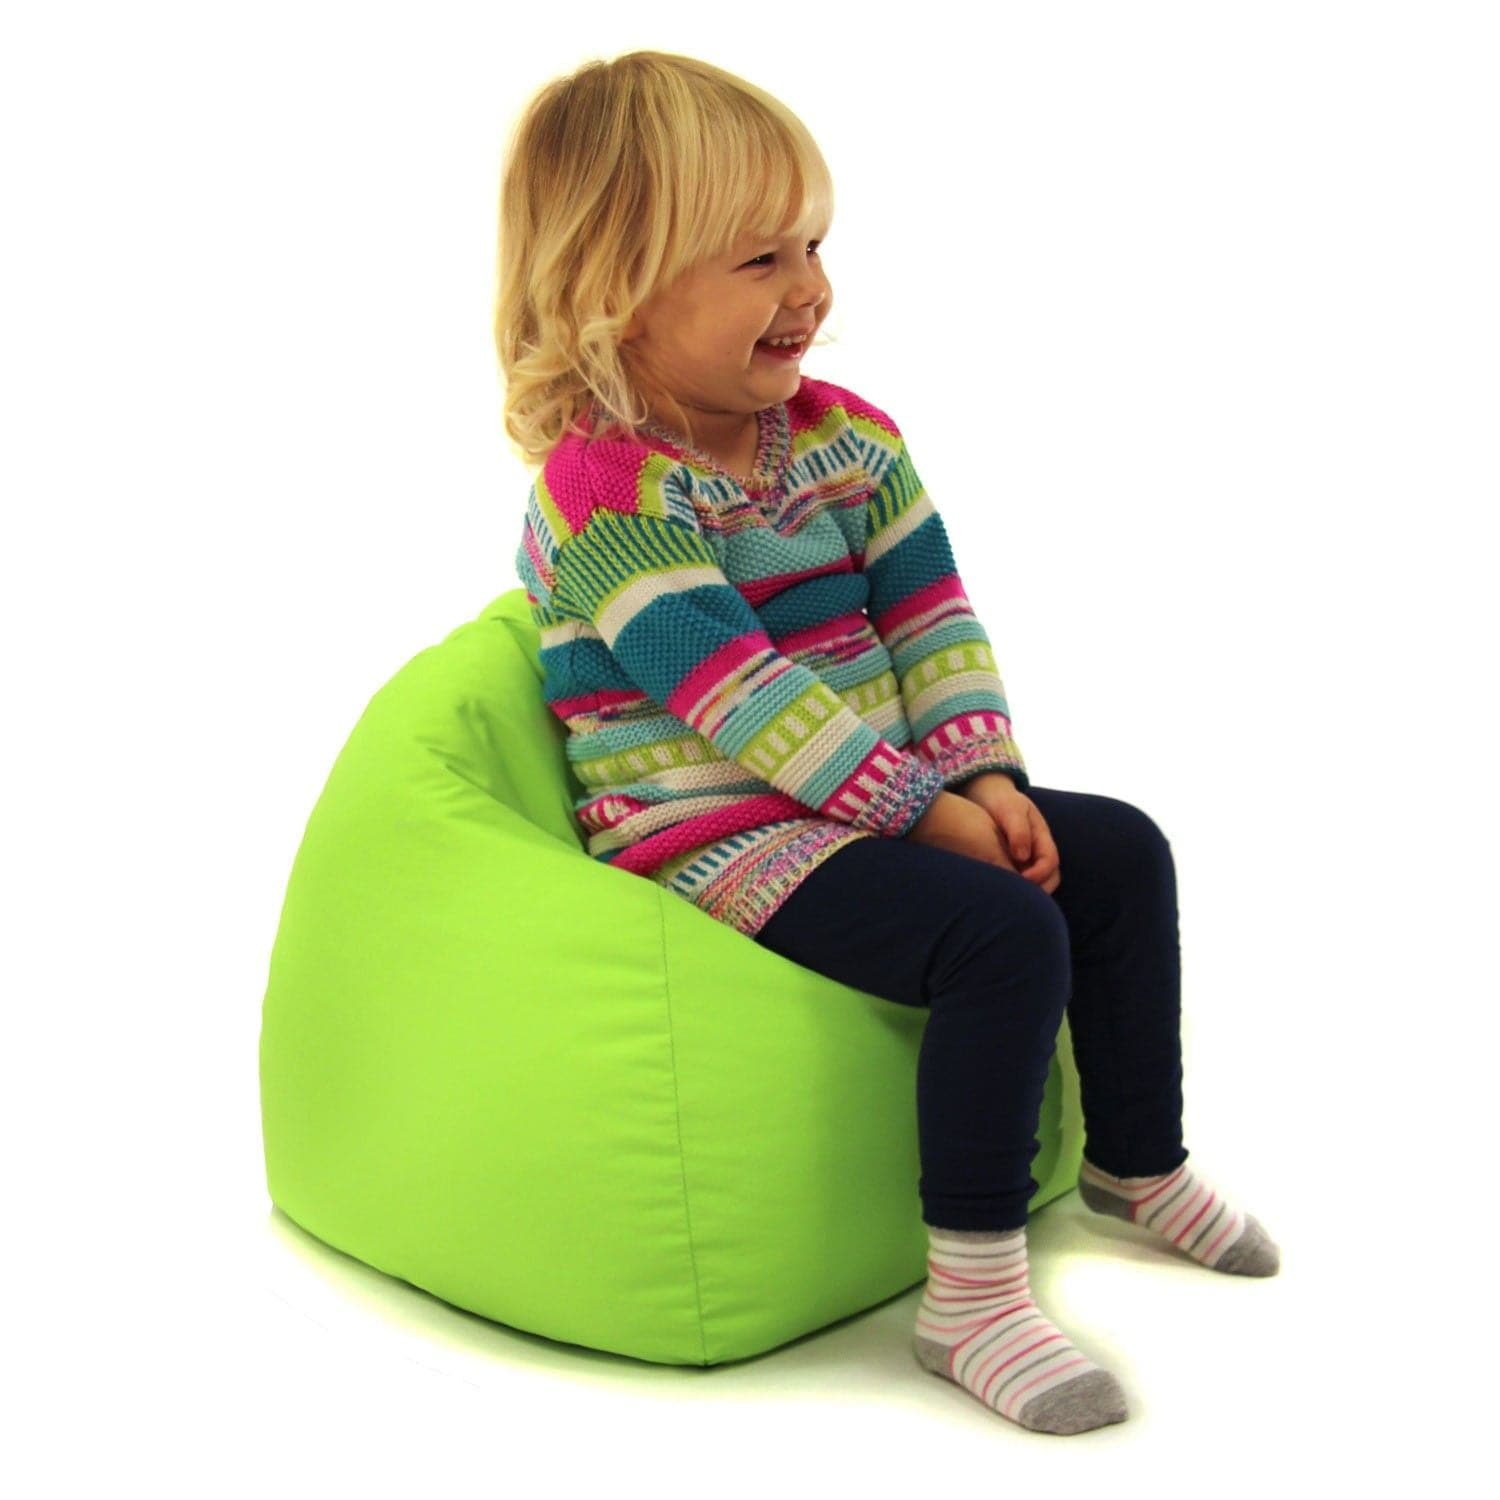 Nursery Bean Bags, The Nursery Bean Bags are small bean bags specifically designed as fit-for-purpose soft seating for early years settings. The Nursery Bean Bags are small but perfectly formed for little learners to help create a colourful, inspiring and welcoming nursery environment, especially for reading corners and story time. Bean bags are a fun, safe, soft seating option that the kids will love - they help make sitting still a treat! Made from durable and waterproof polyester, these nursery bean bags